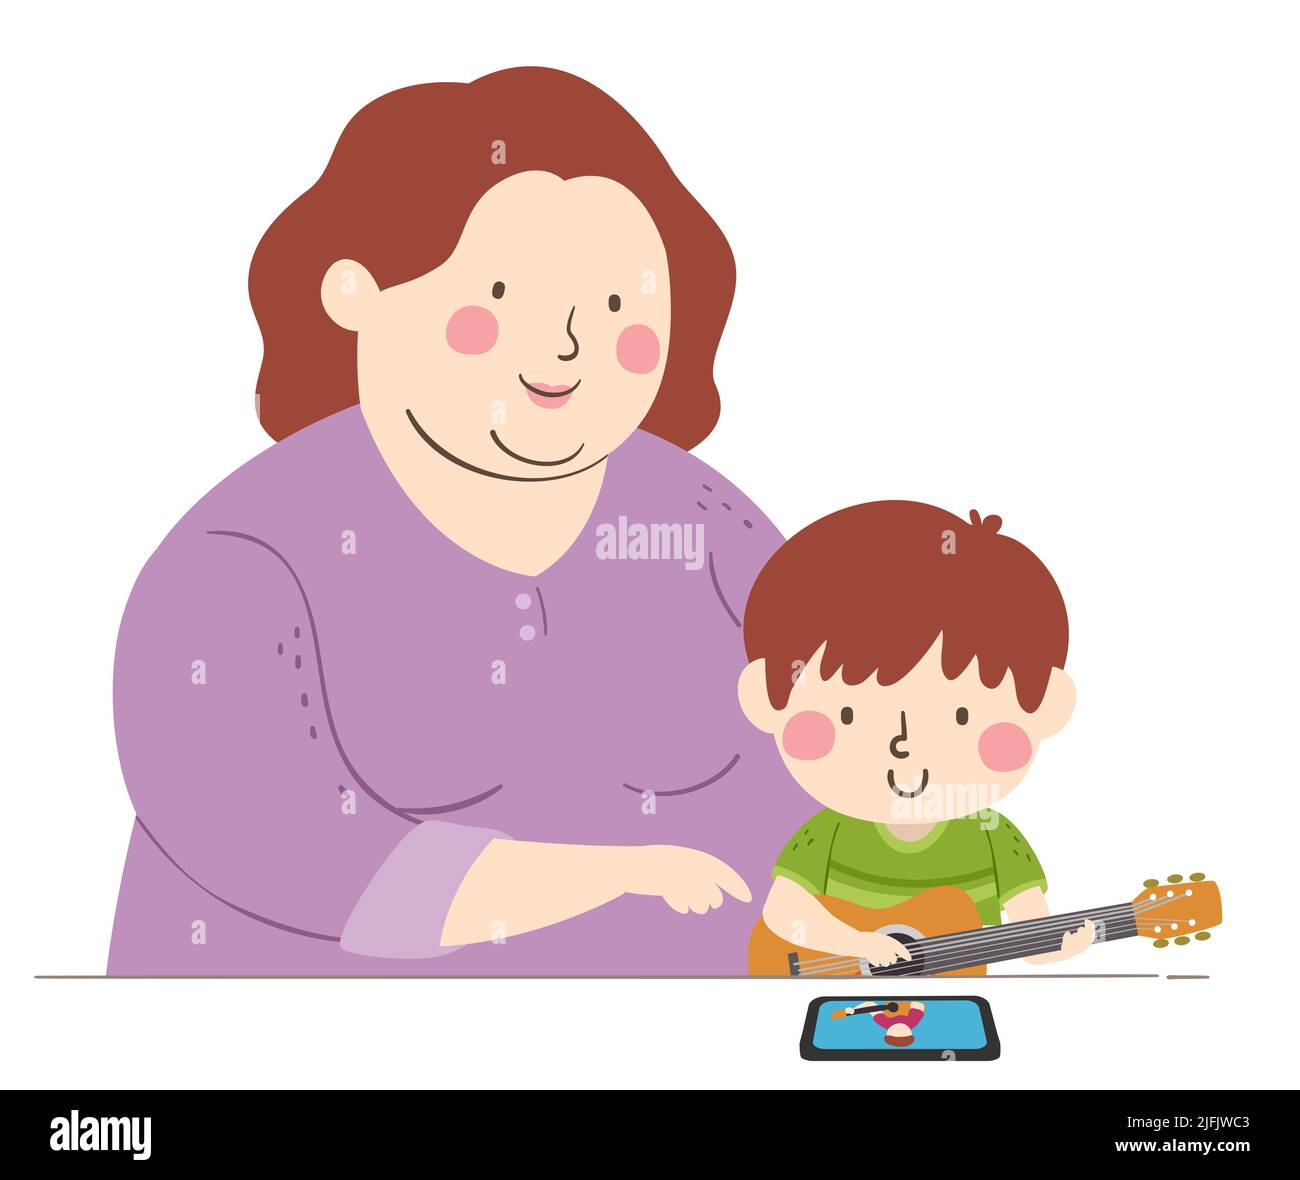 Illustration of a Kid Boy Watching Online with Mom and Learning the Guitar Stock Photo